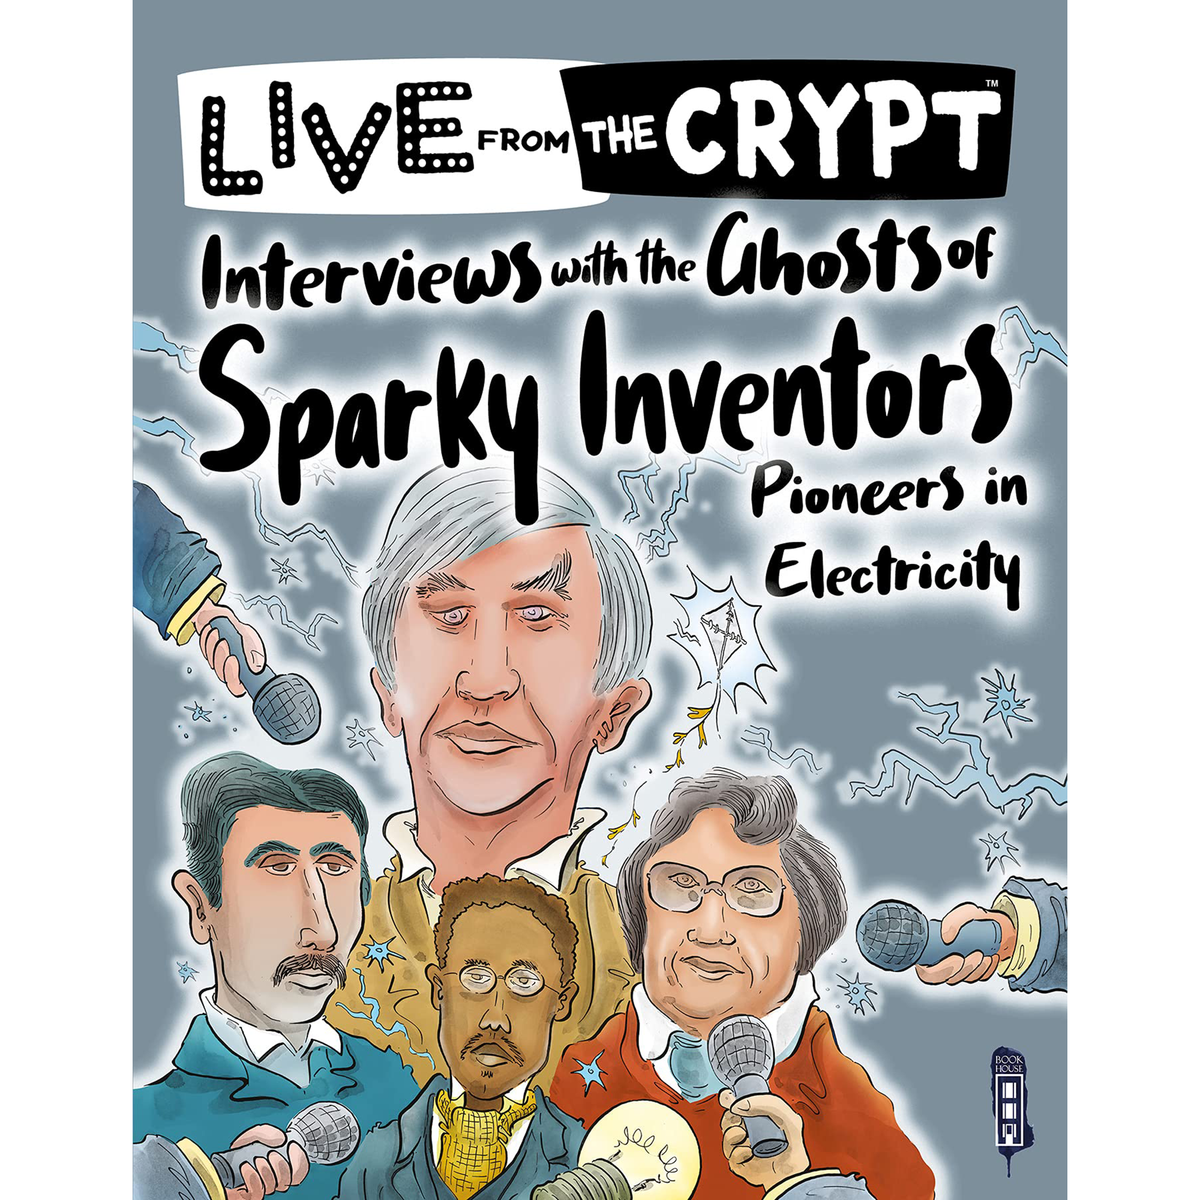 Life from the crypt: Interviews with the ghosts of sparky inventors